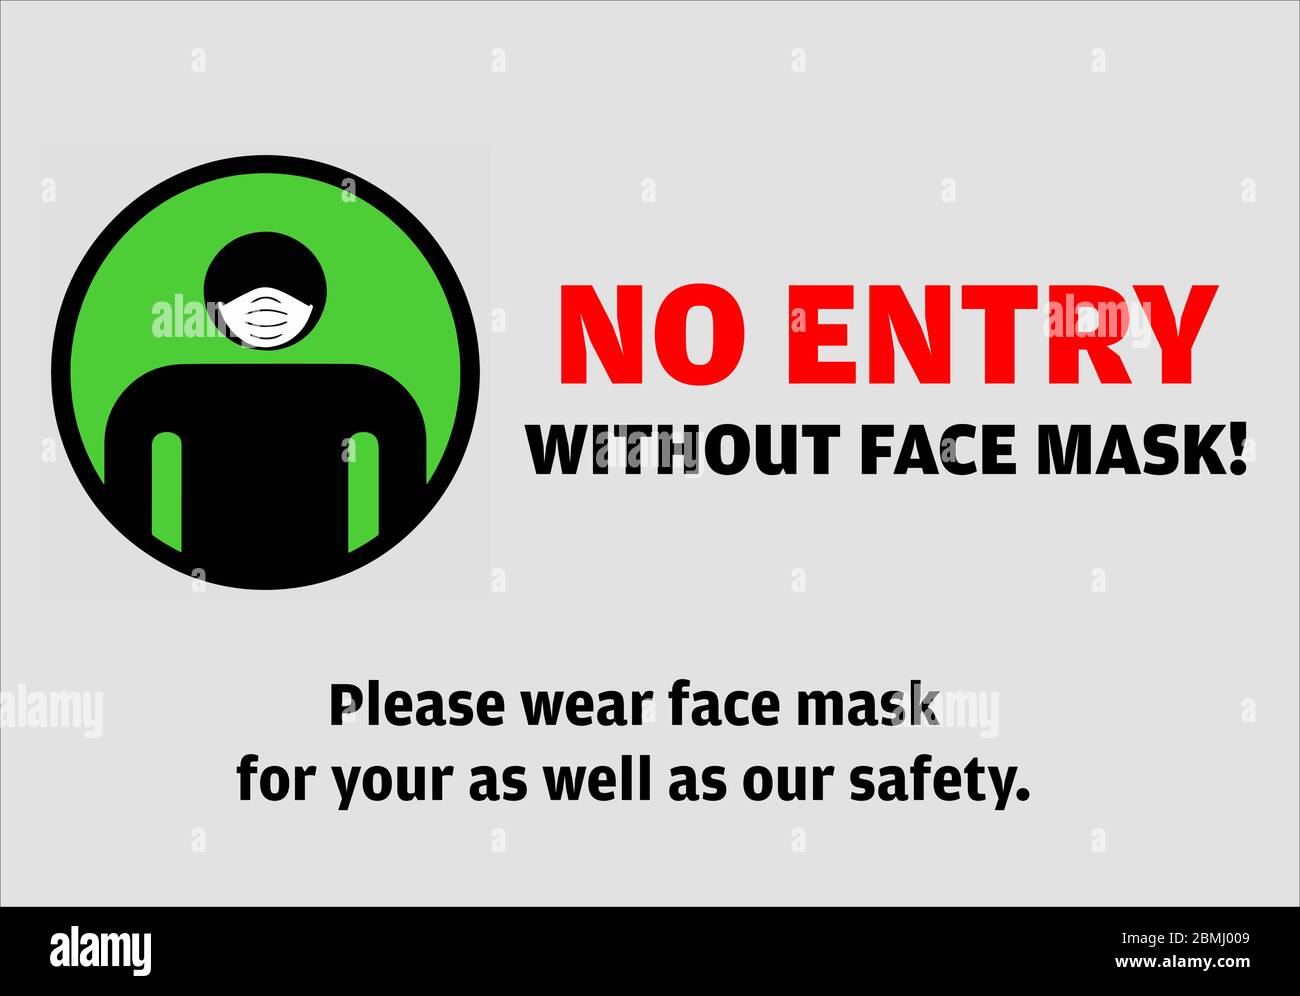 No entry without face mask message vector illustration Stock Vector